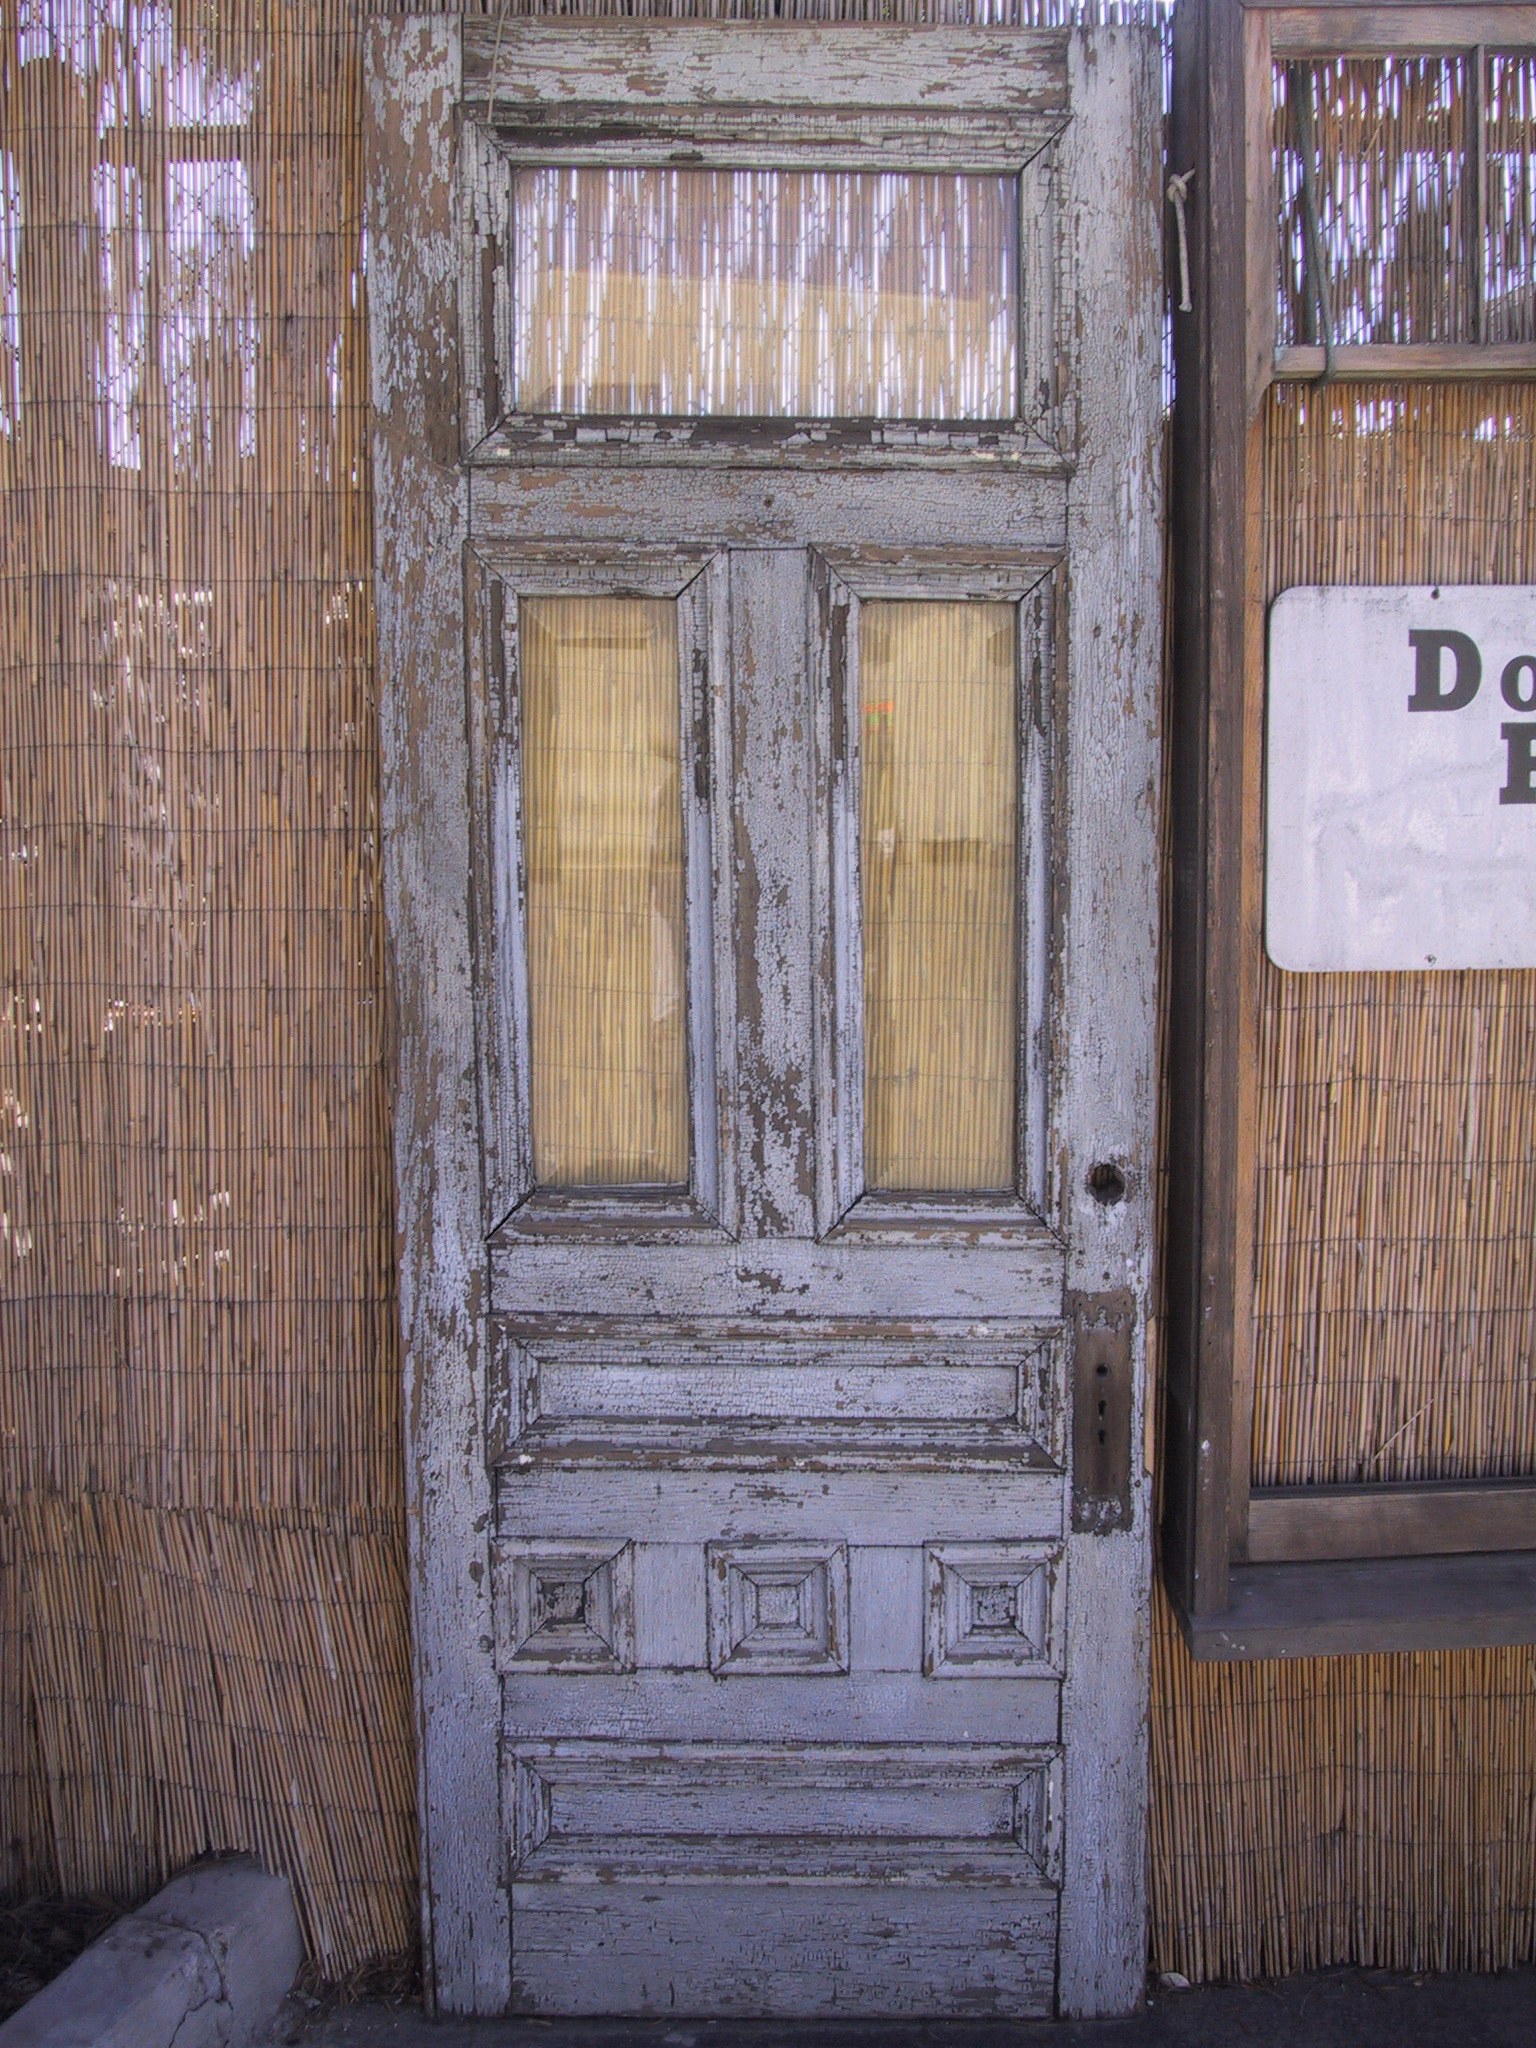 here are some cool old doors for sale